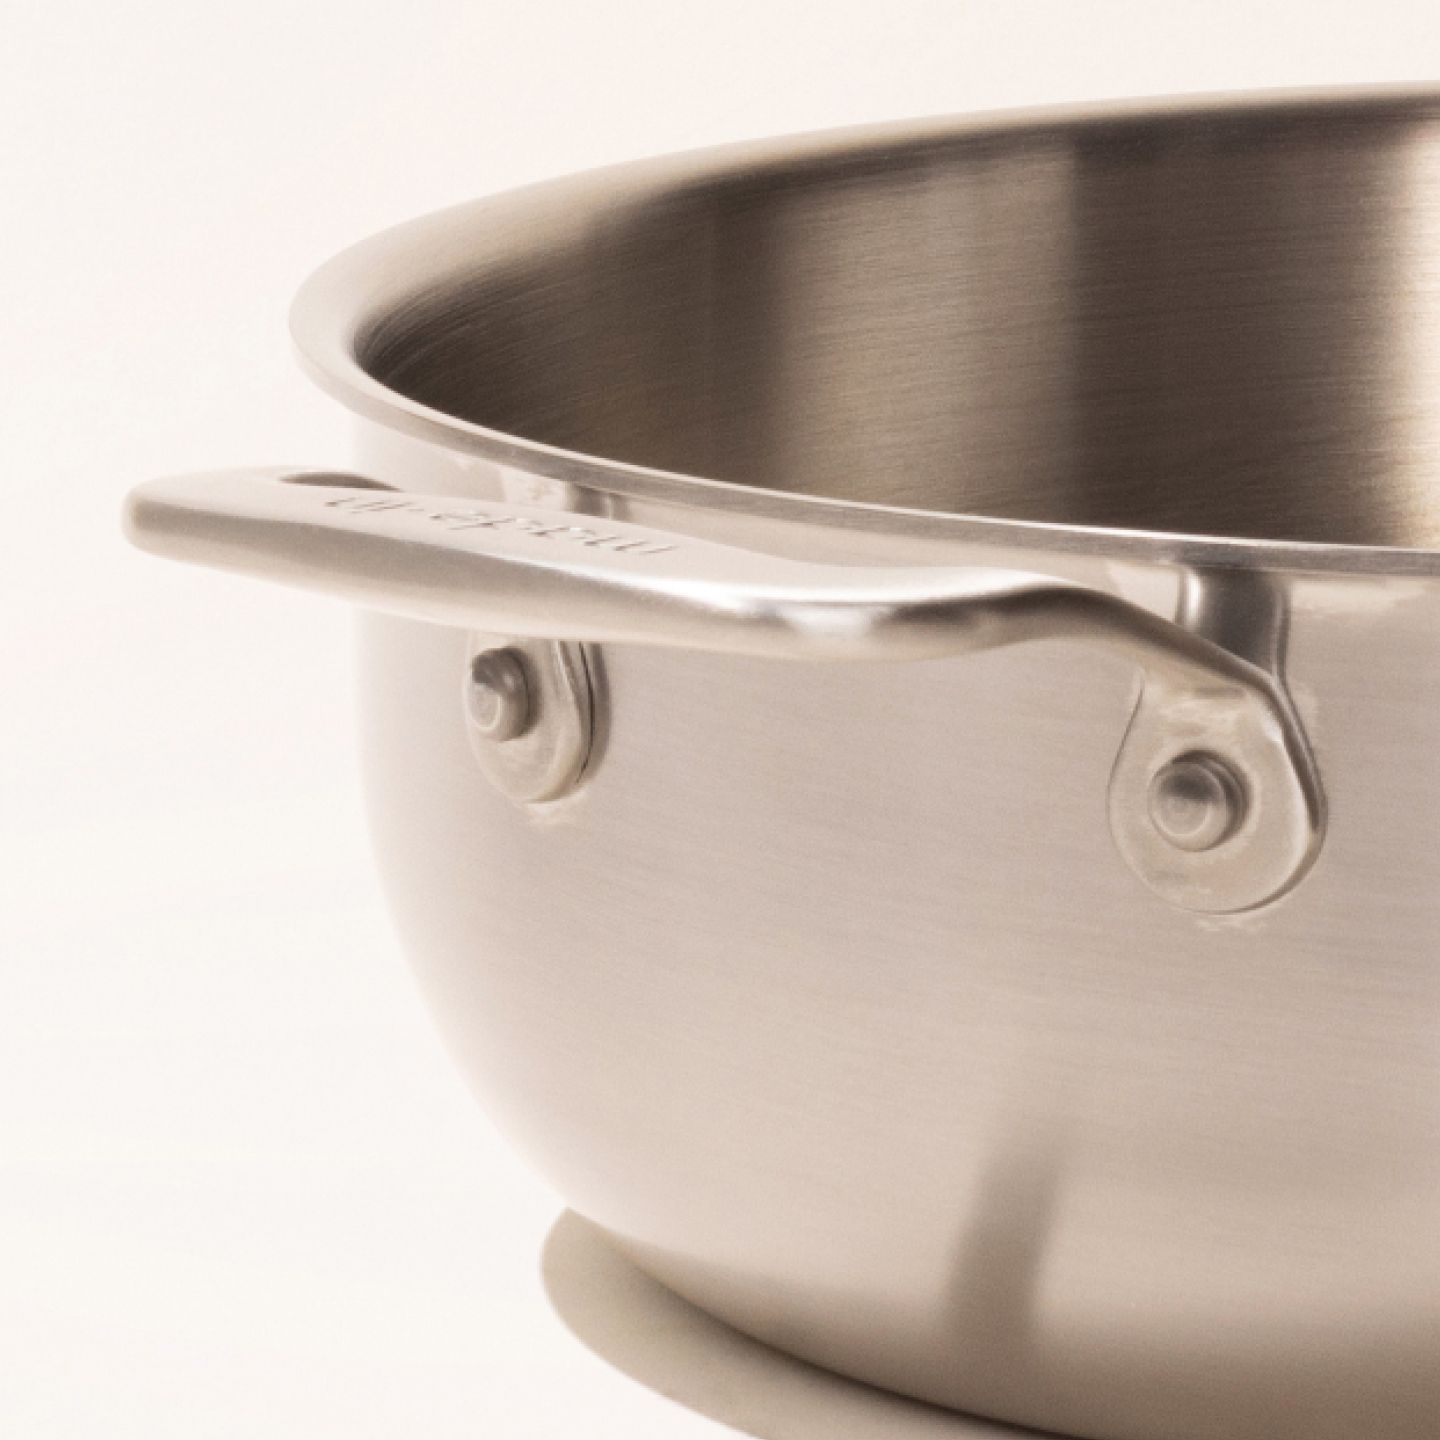 Stainless Clad Butter Warmer